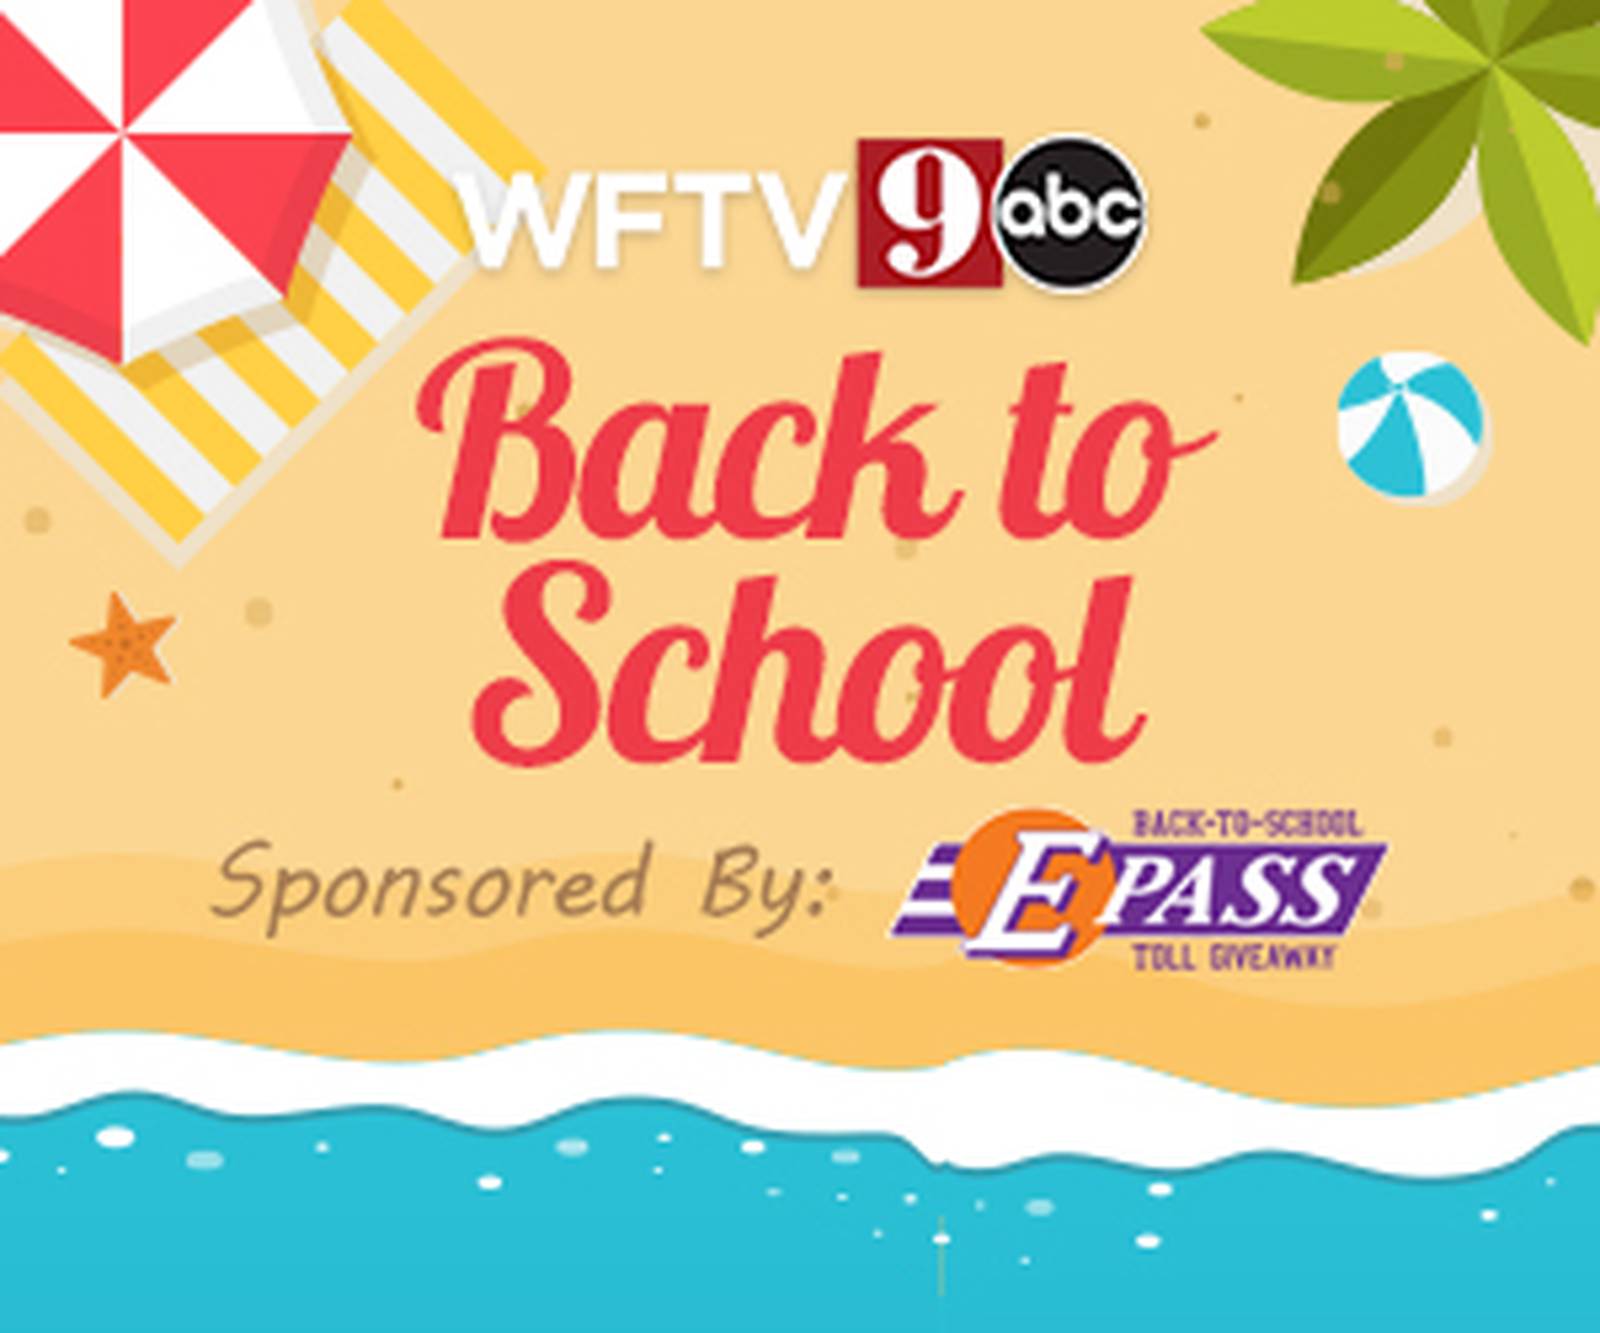 Here are some Central Florida backtoschool events happening this